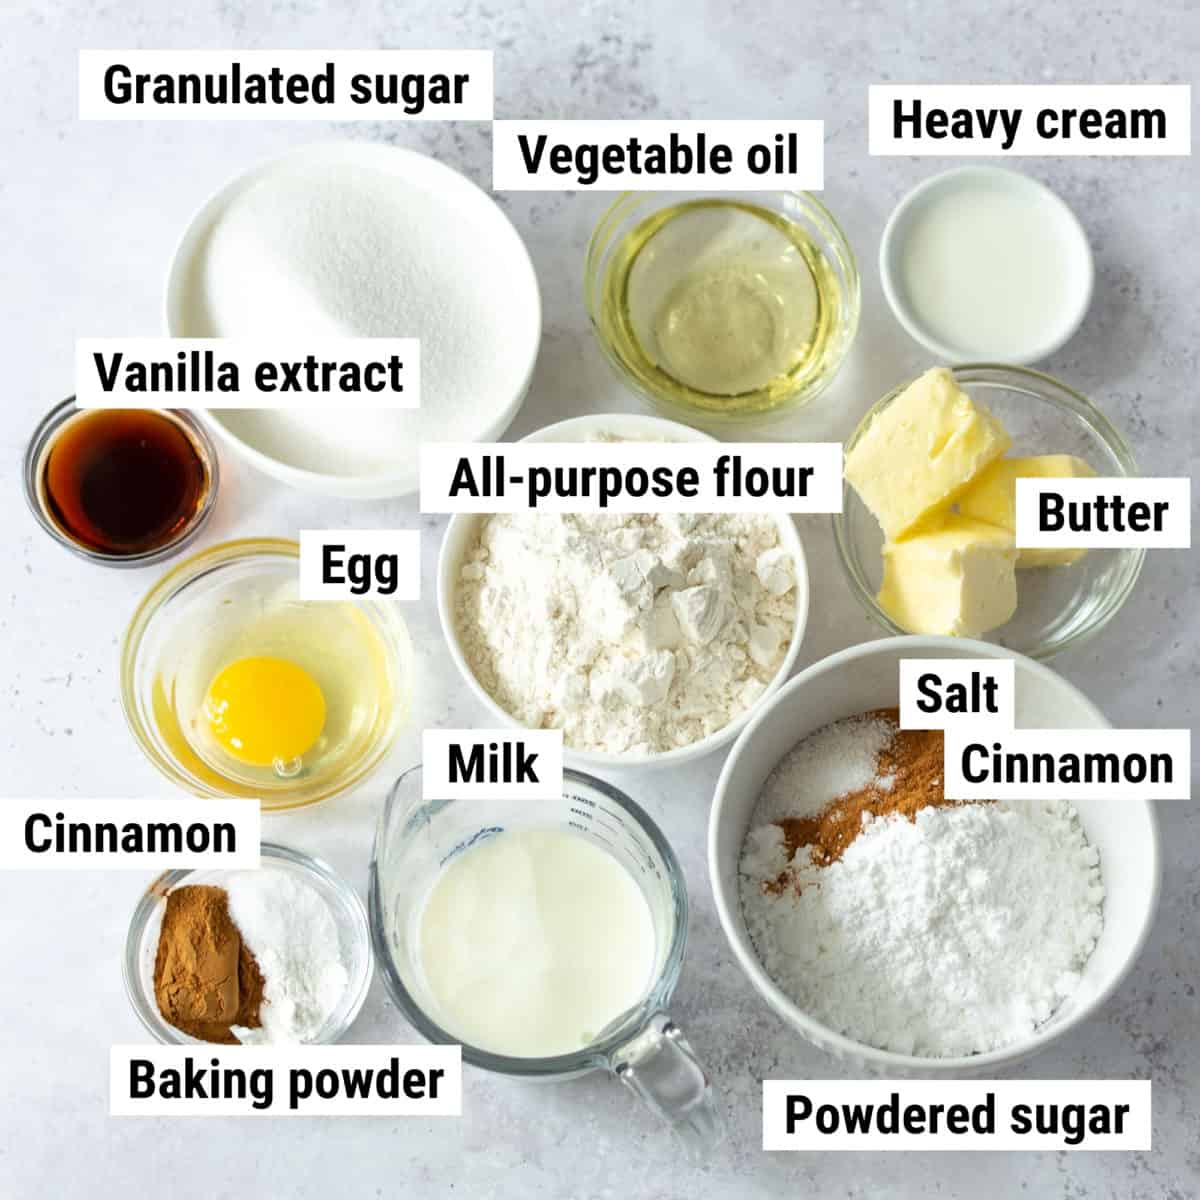 The ingredients used to make cinnamon cupcakes laid out on a table.